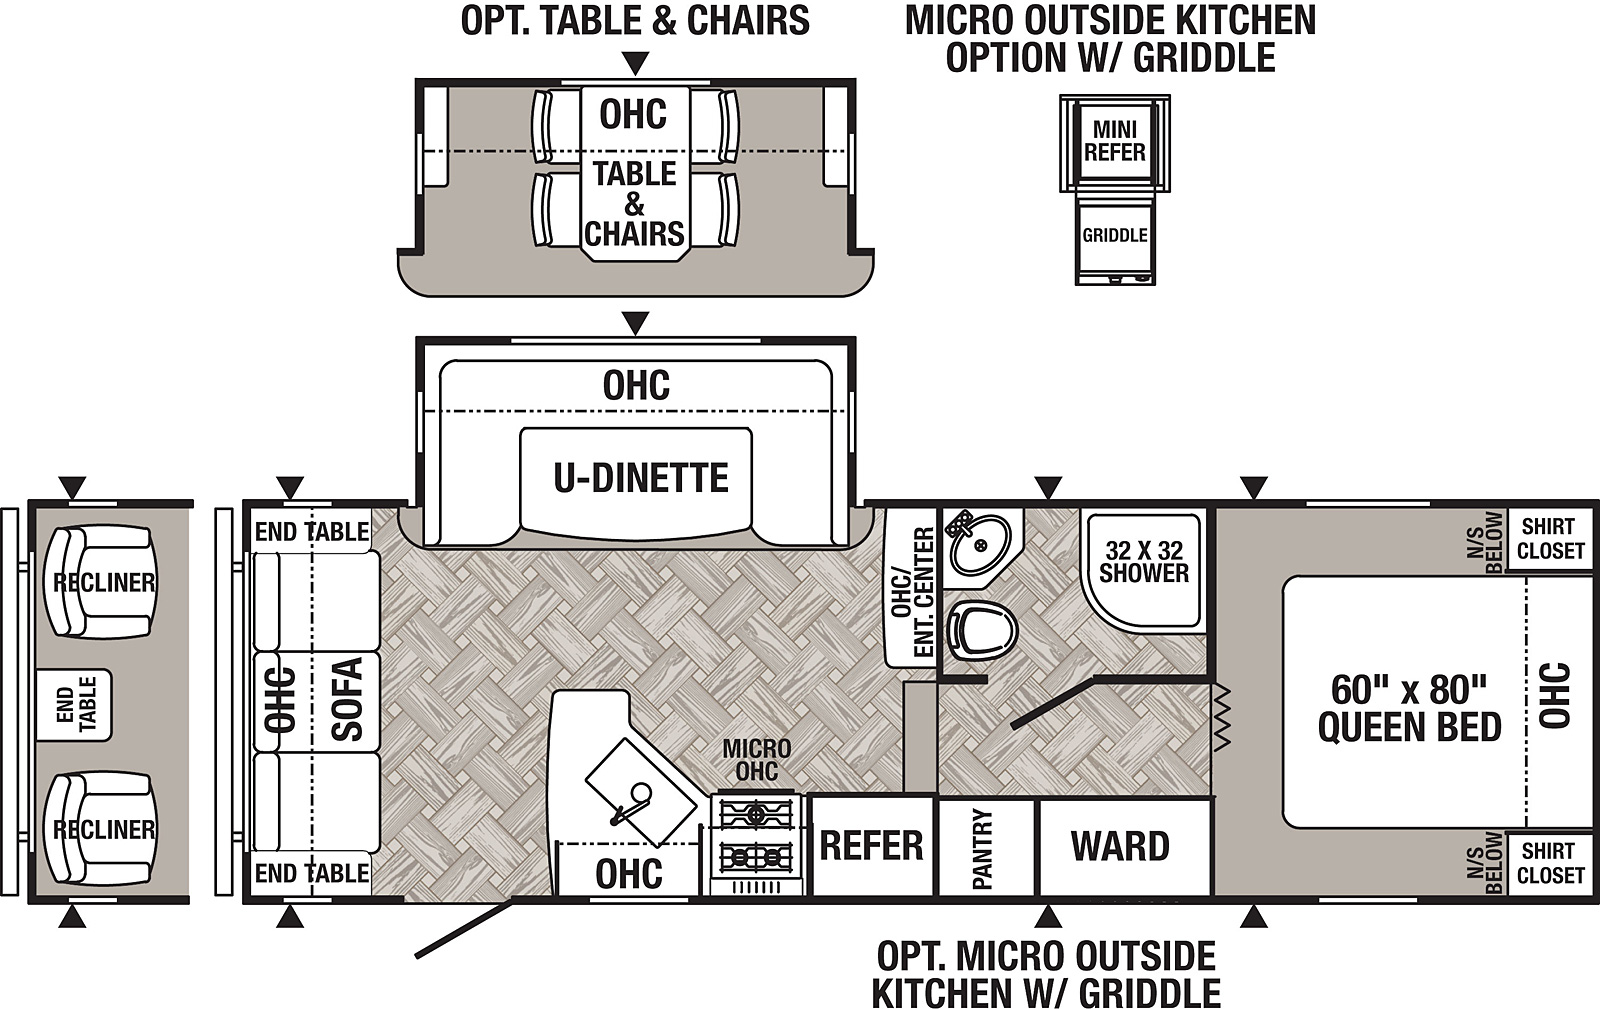 The 253FBS has one slide out on the off door side. Exterior features include a 17 foot awning and a micro outside kitchen. Interior layout from the front to the back: front bedroom with queen bed; wardrobe and pantry; full bathroom; steps into living and kitchen area; slide out containing a U-dinette, optional table and chairs; kitchen contains refrigerator, microwave and cooktop stove; three cushion sofa, optional recliners.